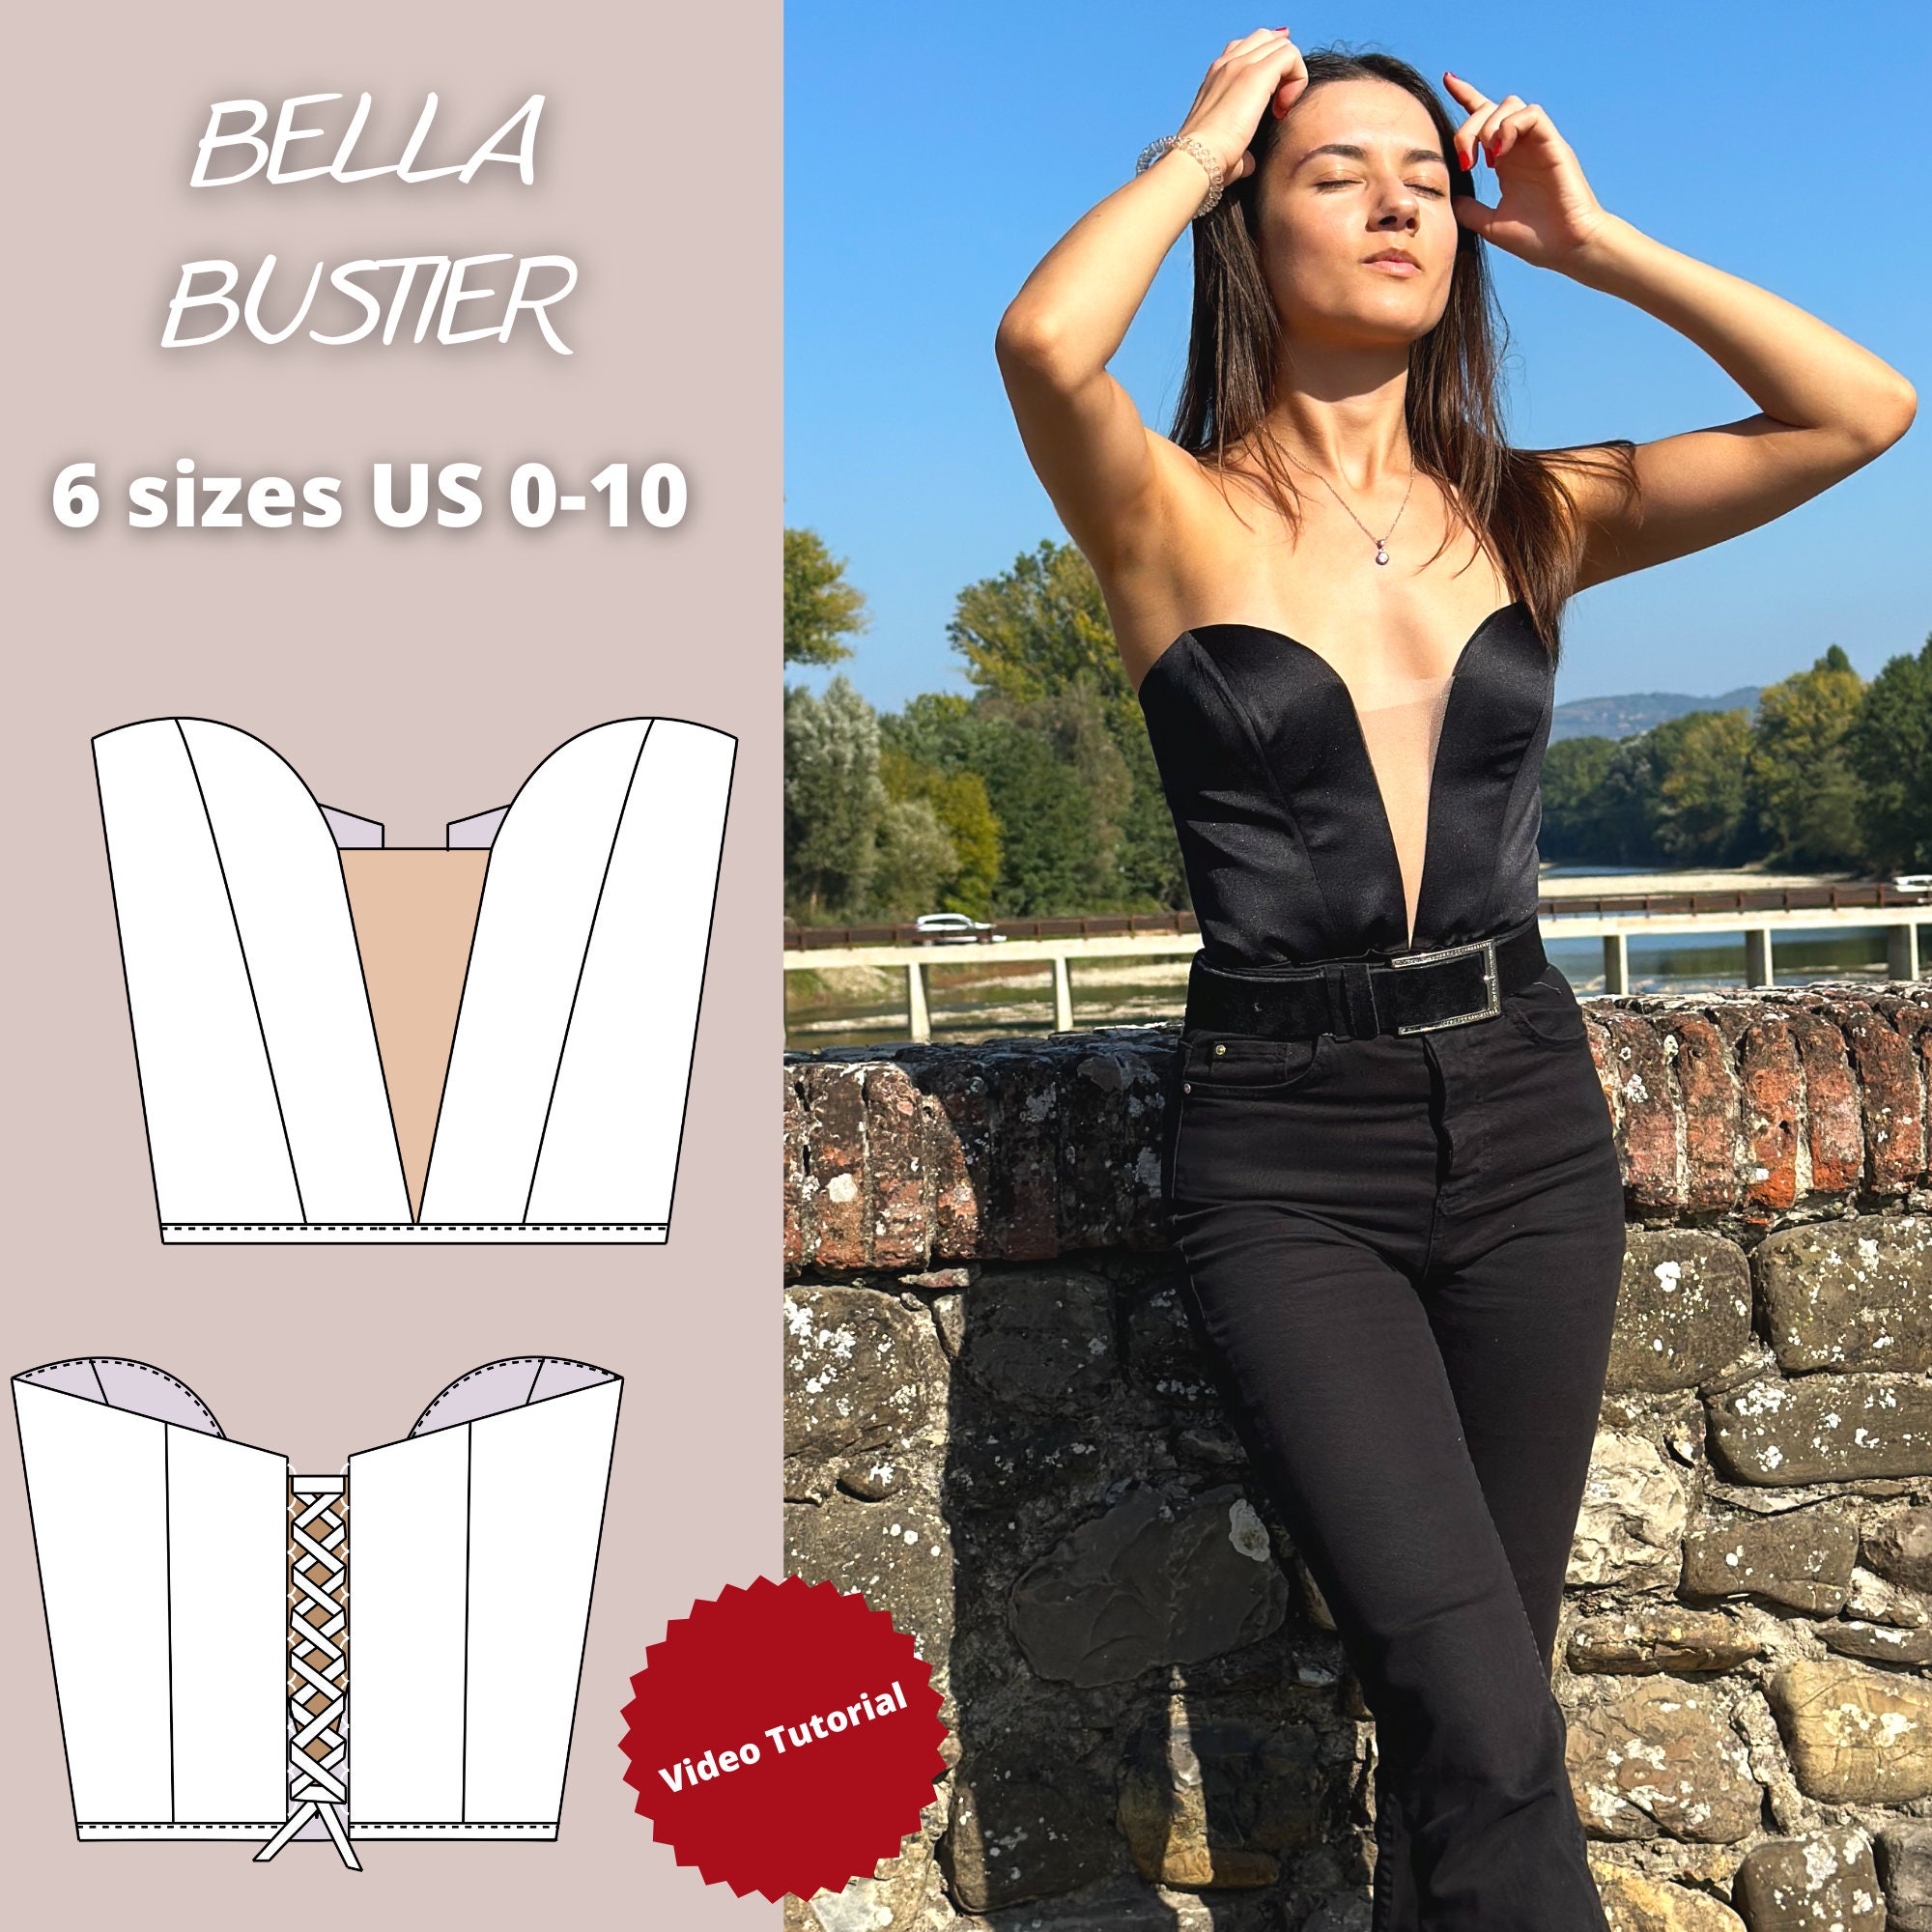 Corset Pattern TILLY the 14 Panelled Over-bust Bodysuit Sizes UK 8